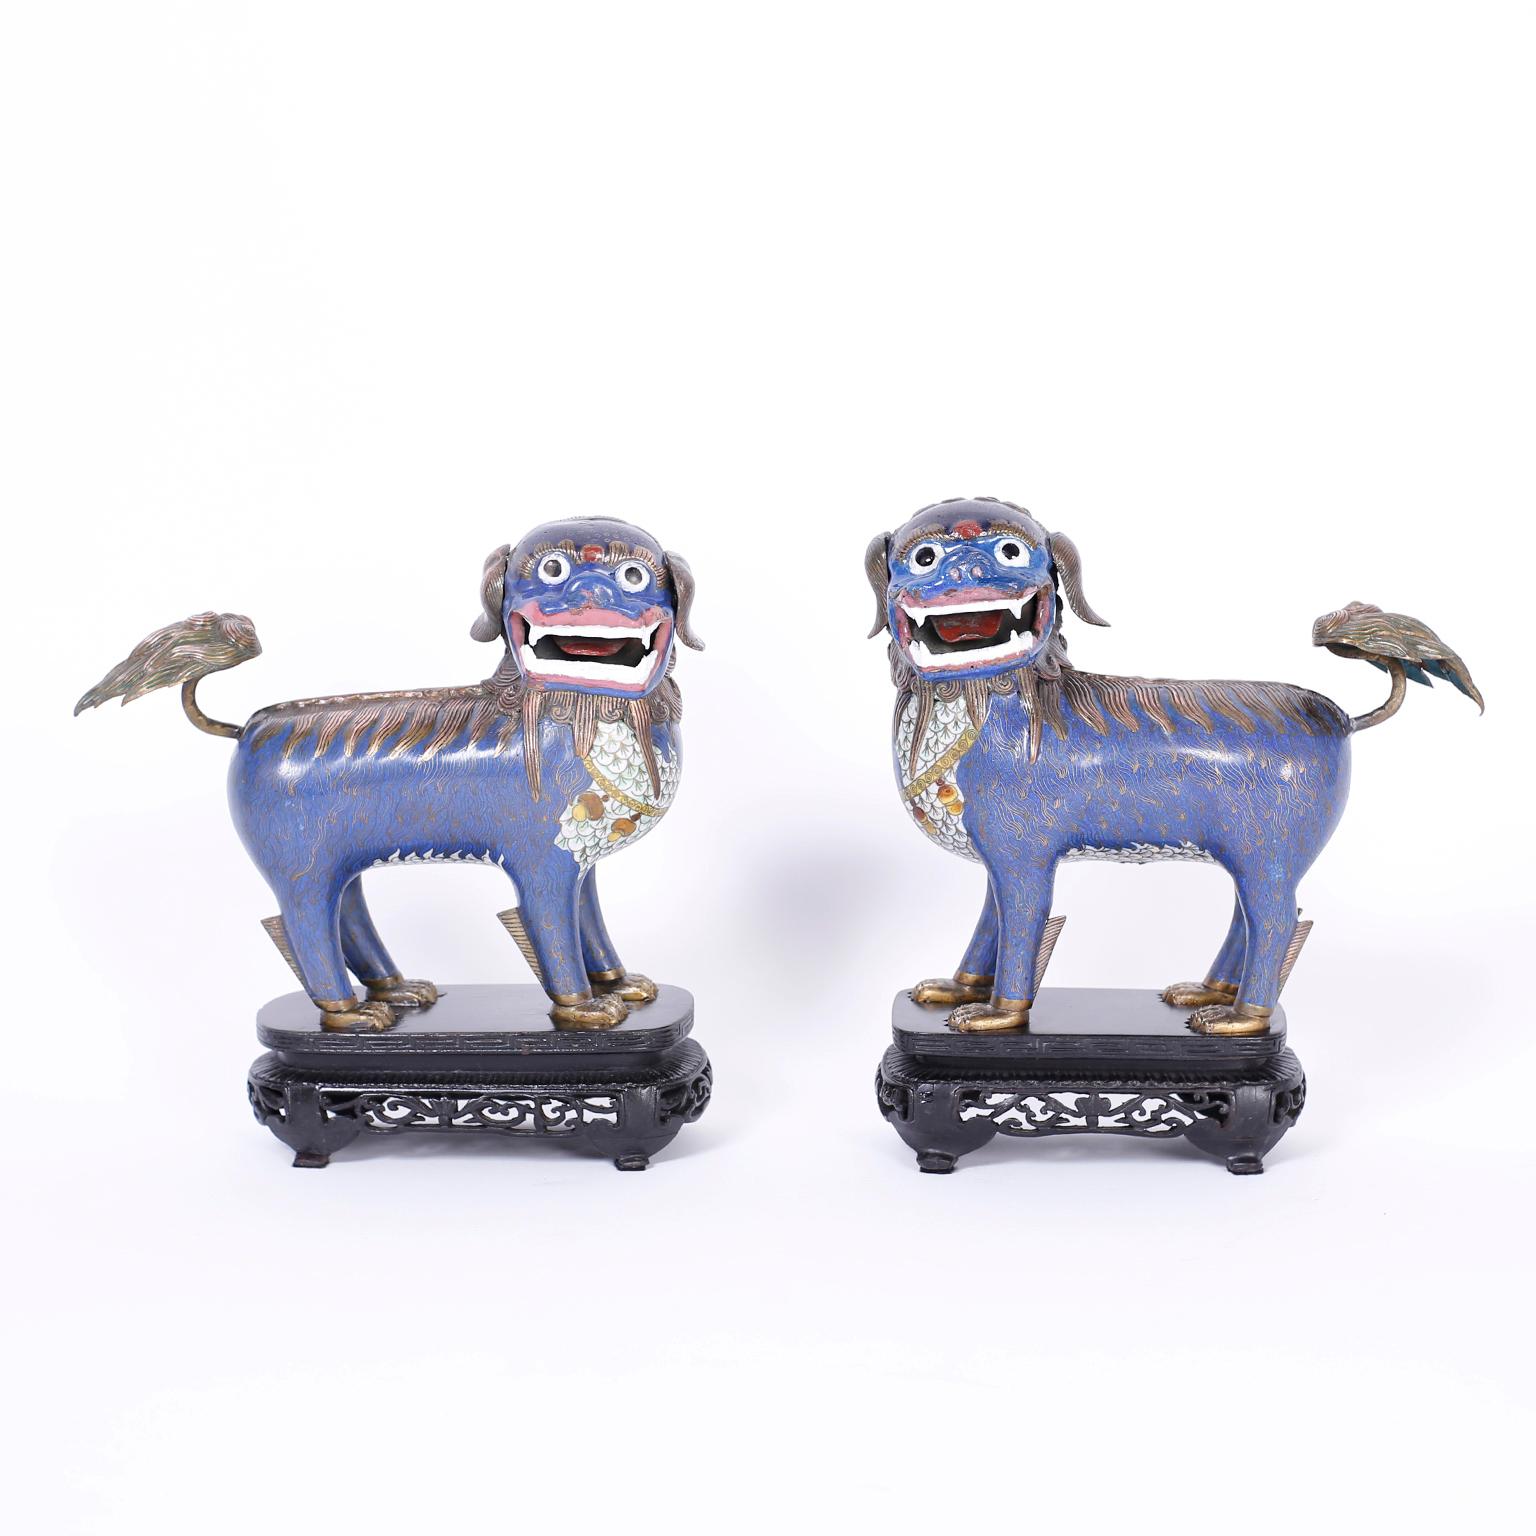 Unusual pair of Chinese cloisonné foo lions featuring exaggerated expressions, stylized big cat characteristics, alluring blue background, and presented on the original carved and ebonized bases.